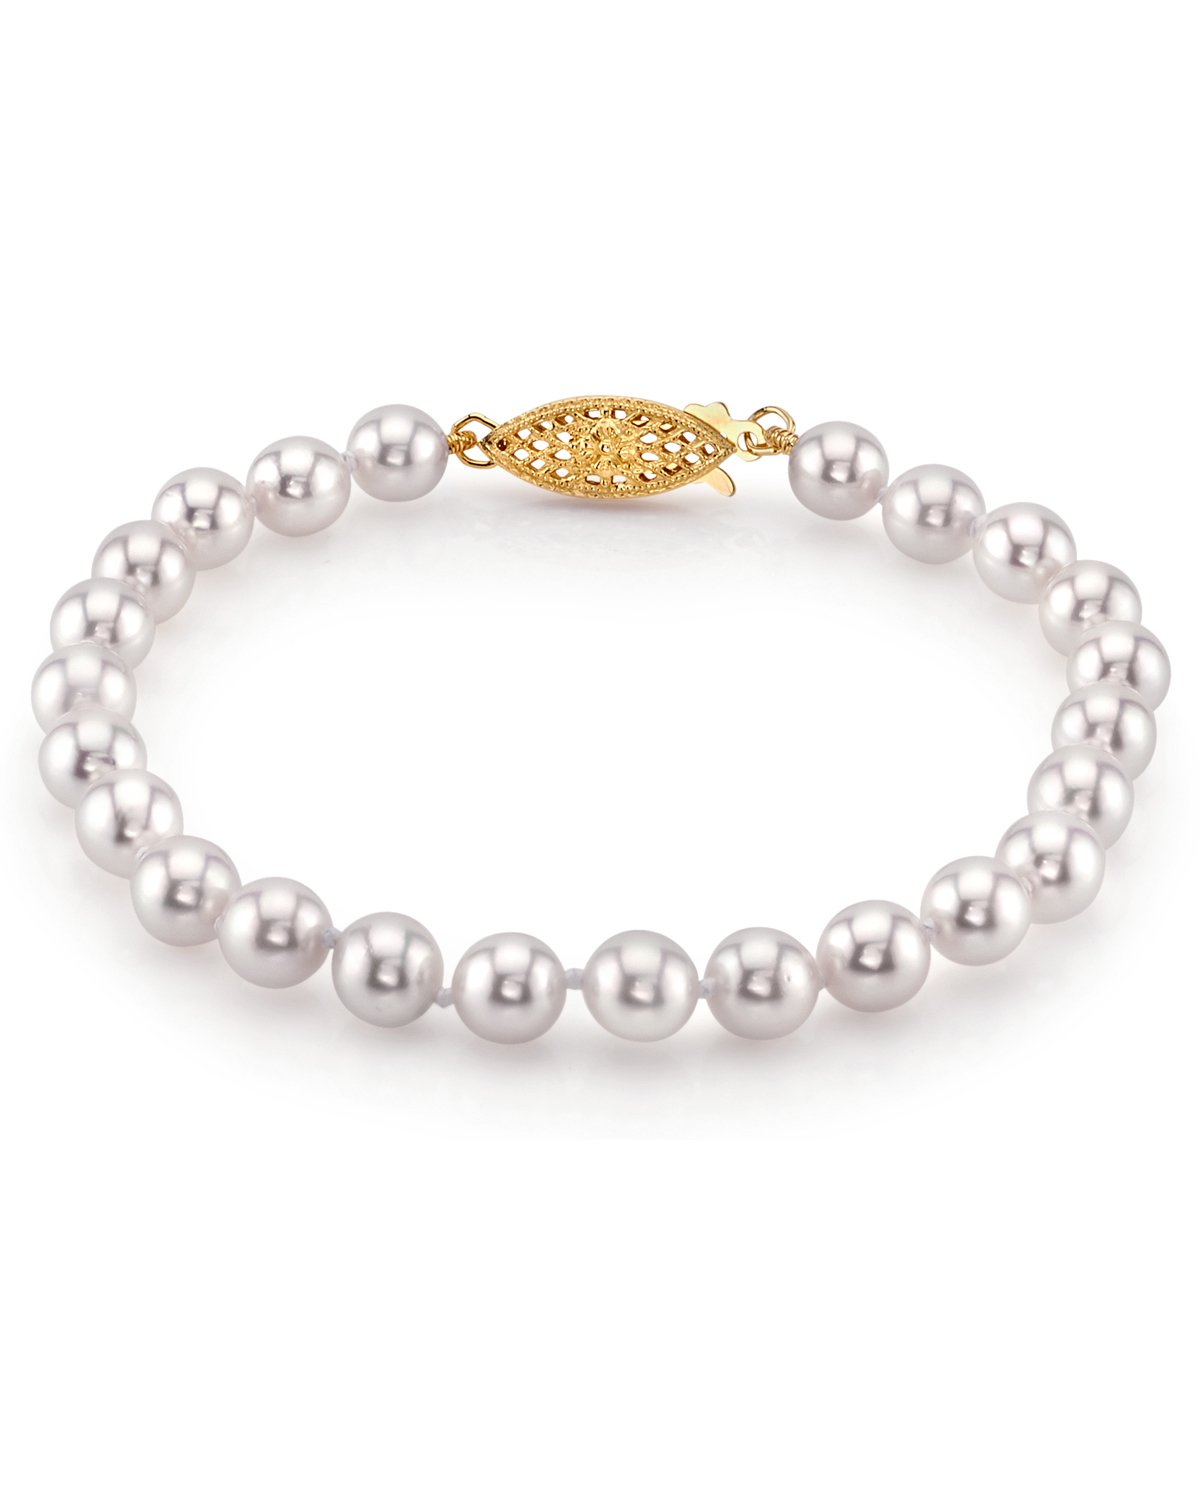 6.0-6.5mm Akoya White Pearl Bracelet- Choose Your Quality - Secondary Image